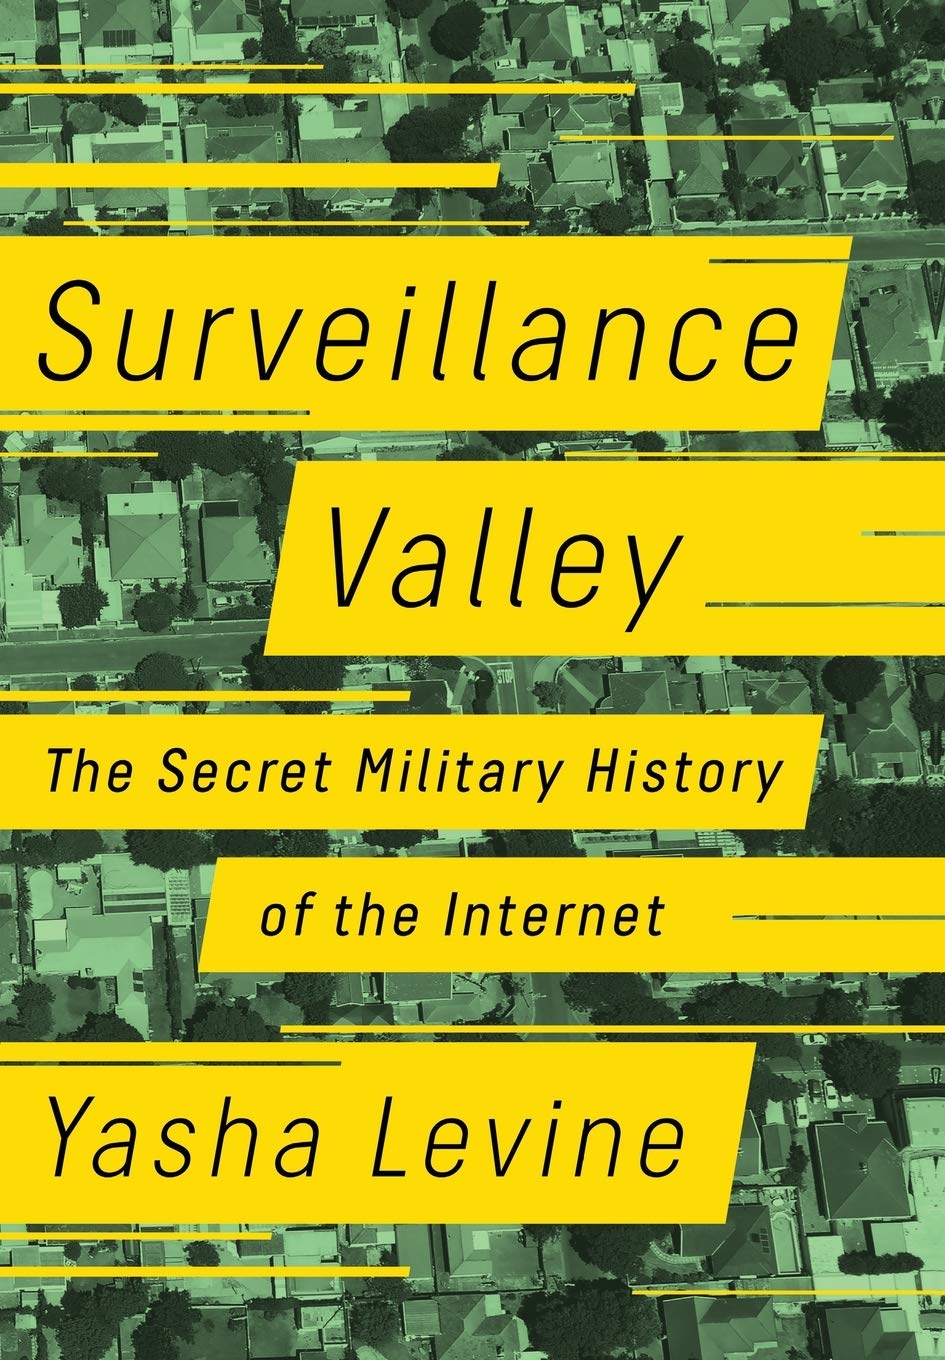 Surveillance Valley: The Secret Military History of the Internet (2018, PublicAffairs)